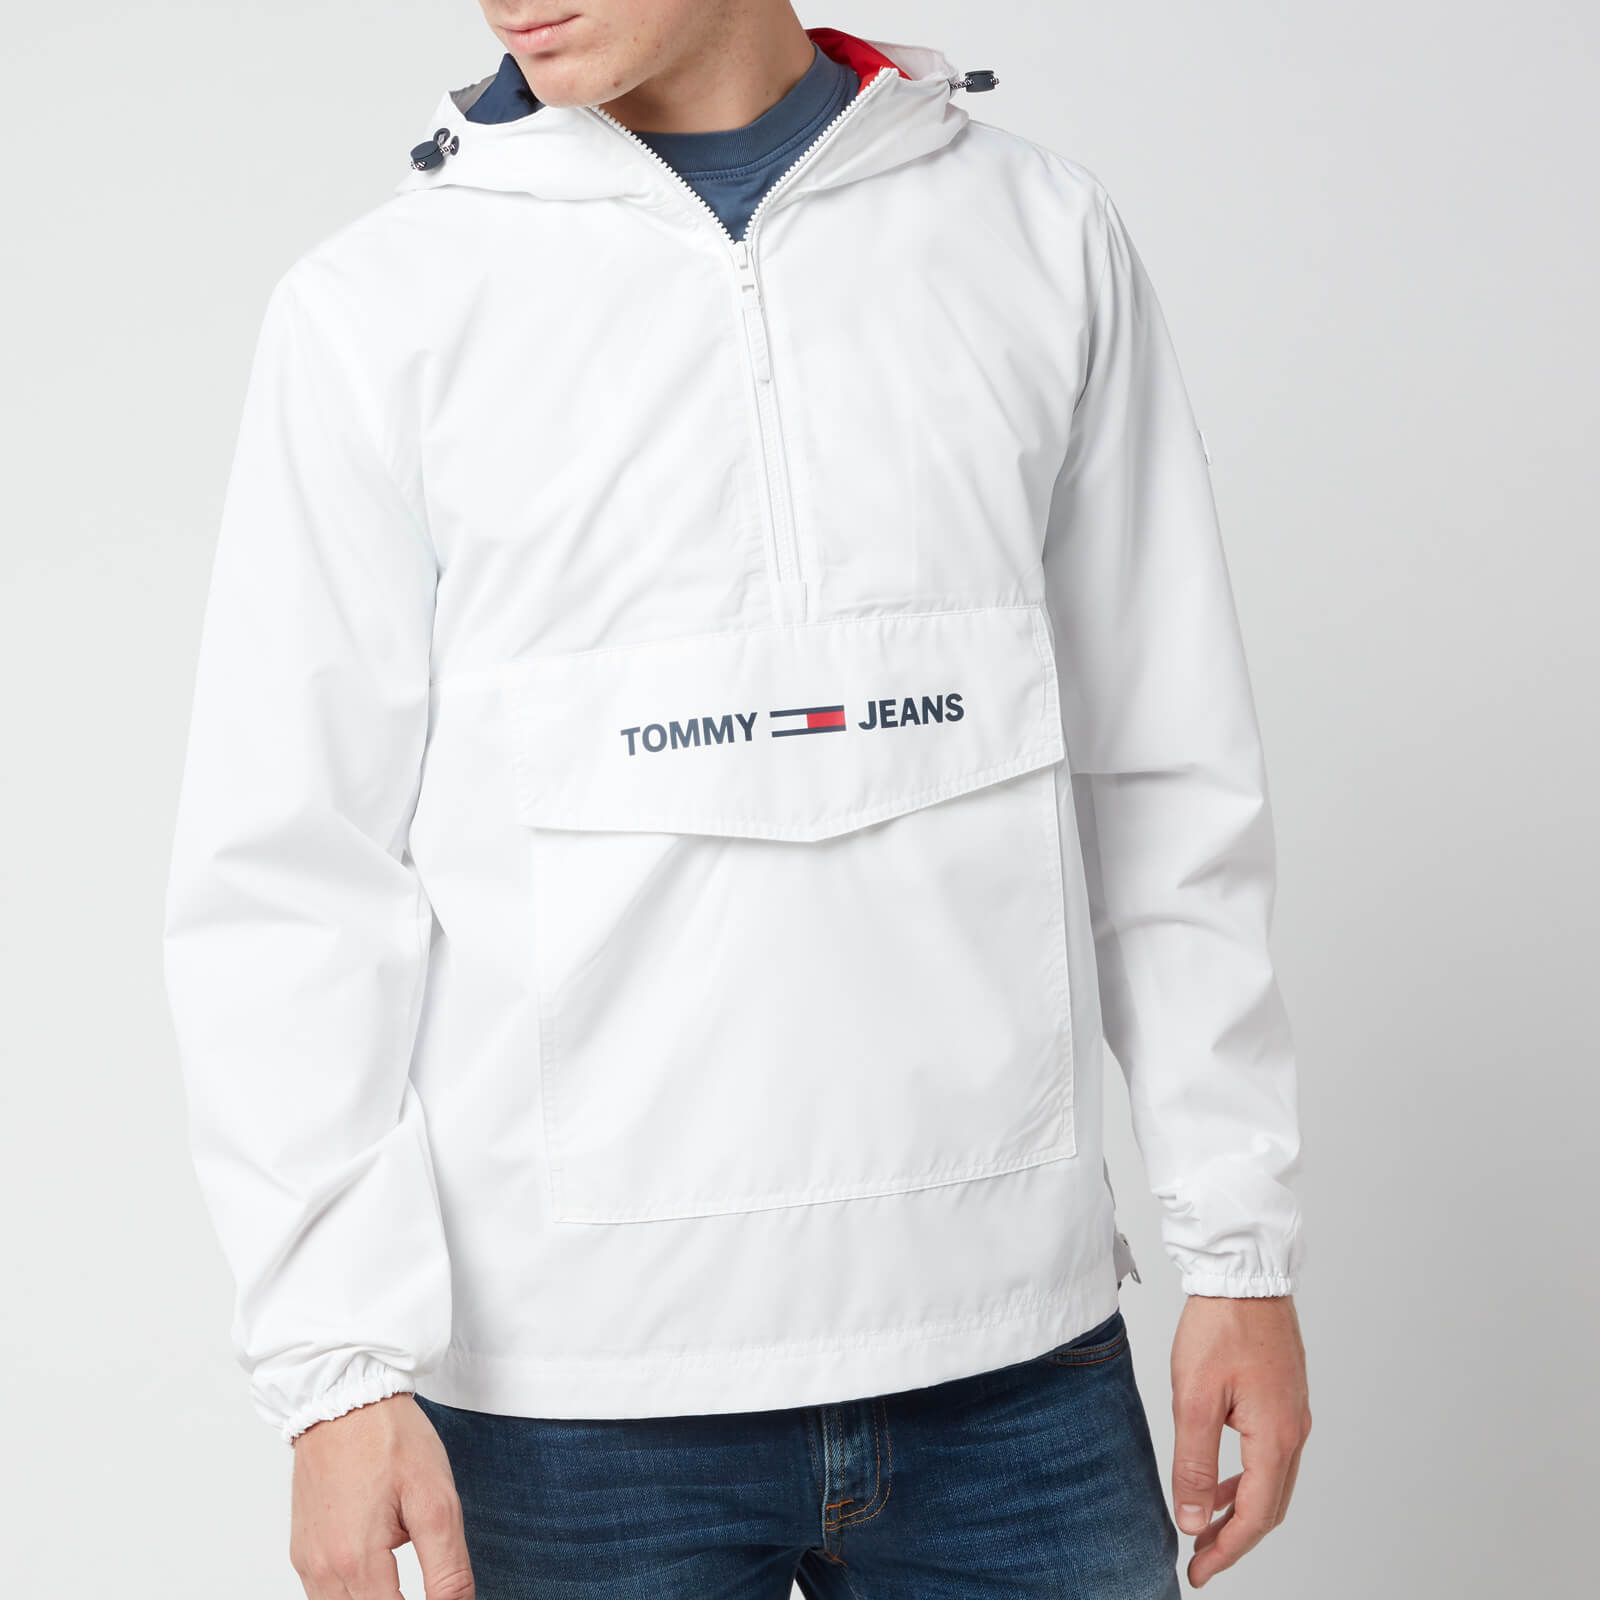 Tommy Jeans White Jacket Flash Sales, UP TO 65% OFF | www 